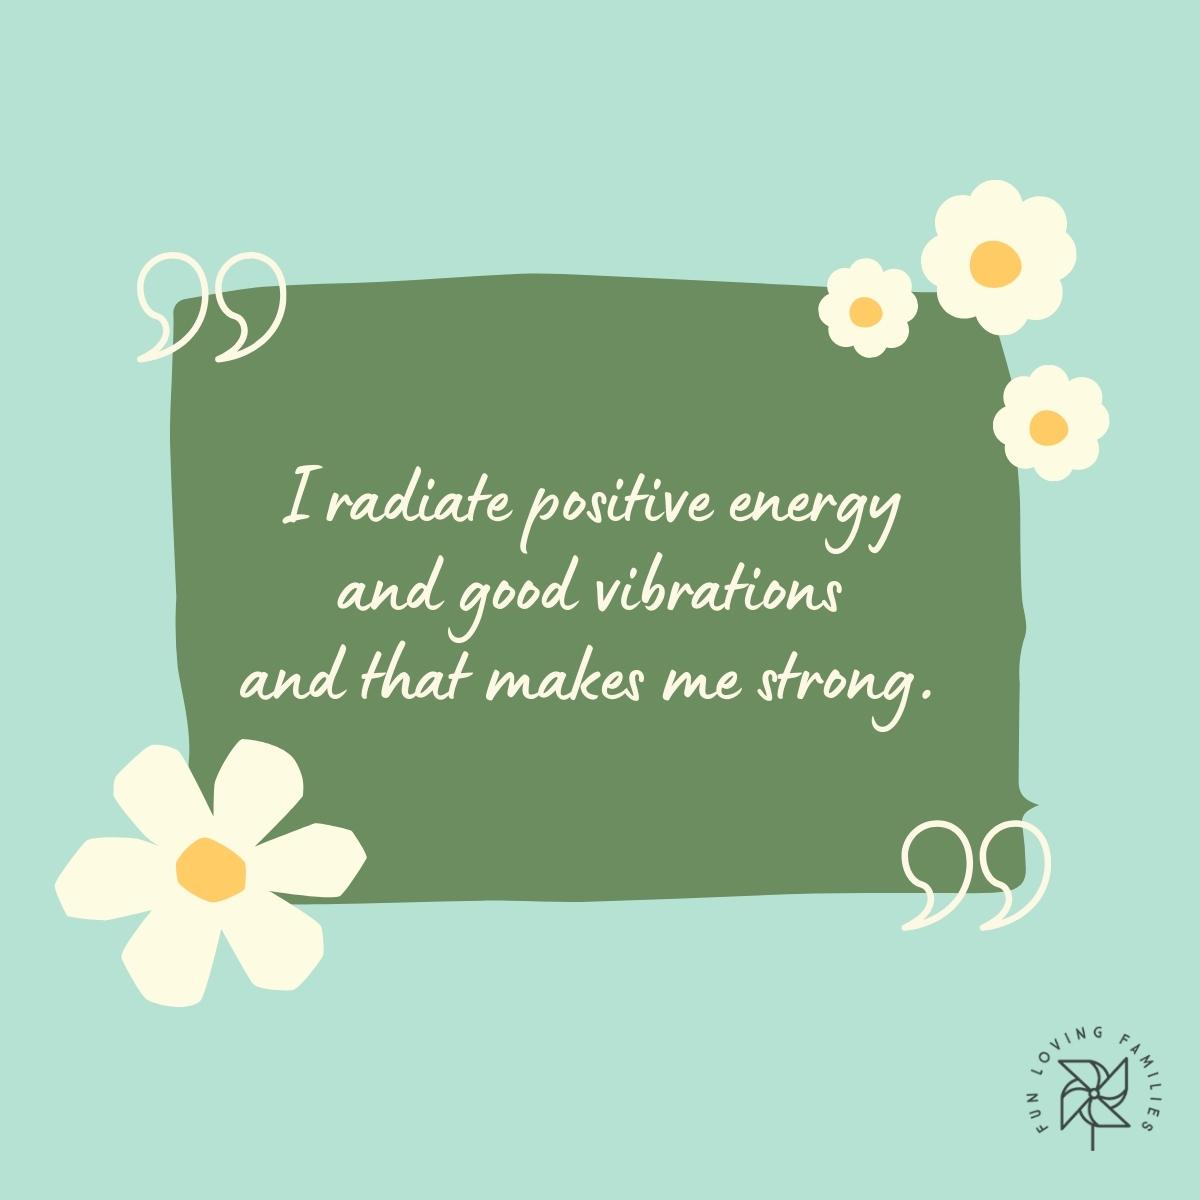 I radiate positive energy and good vibrations and that makes me strong affirmation image.